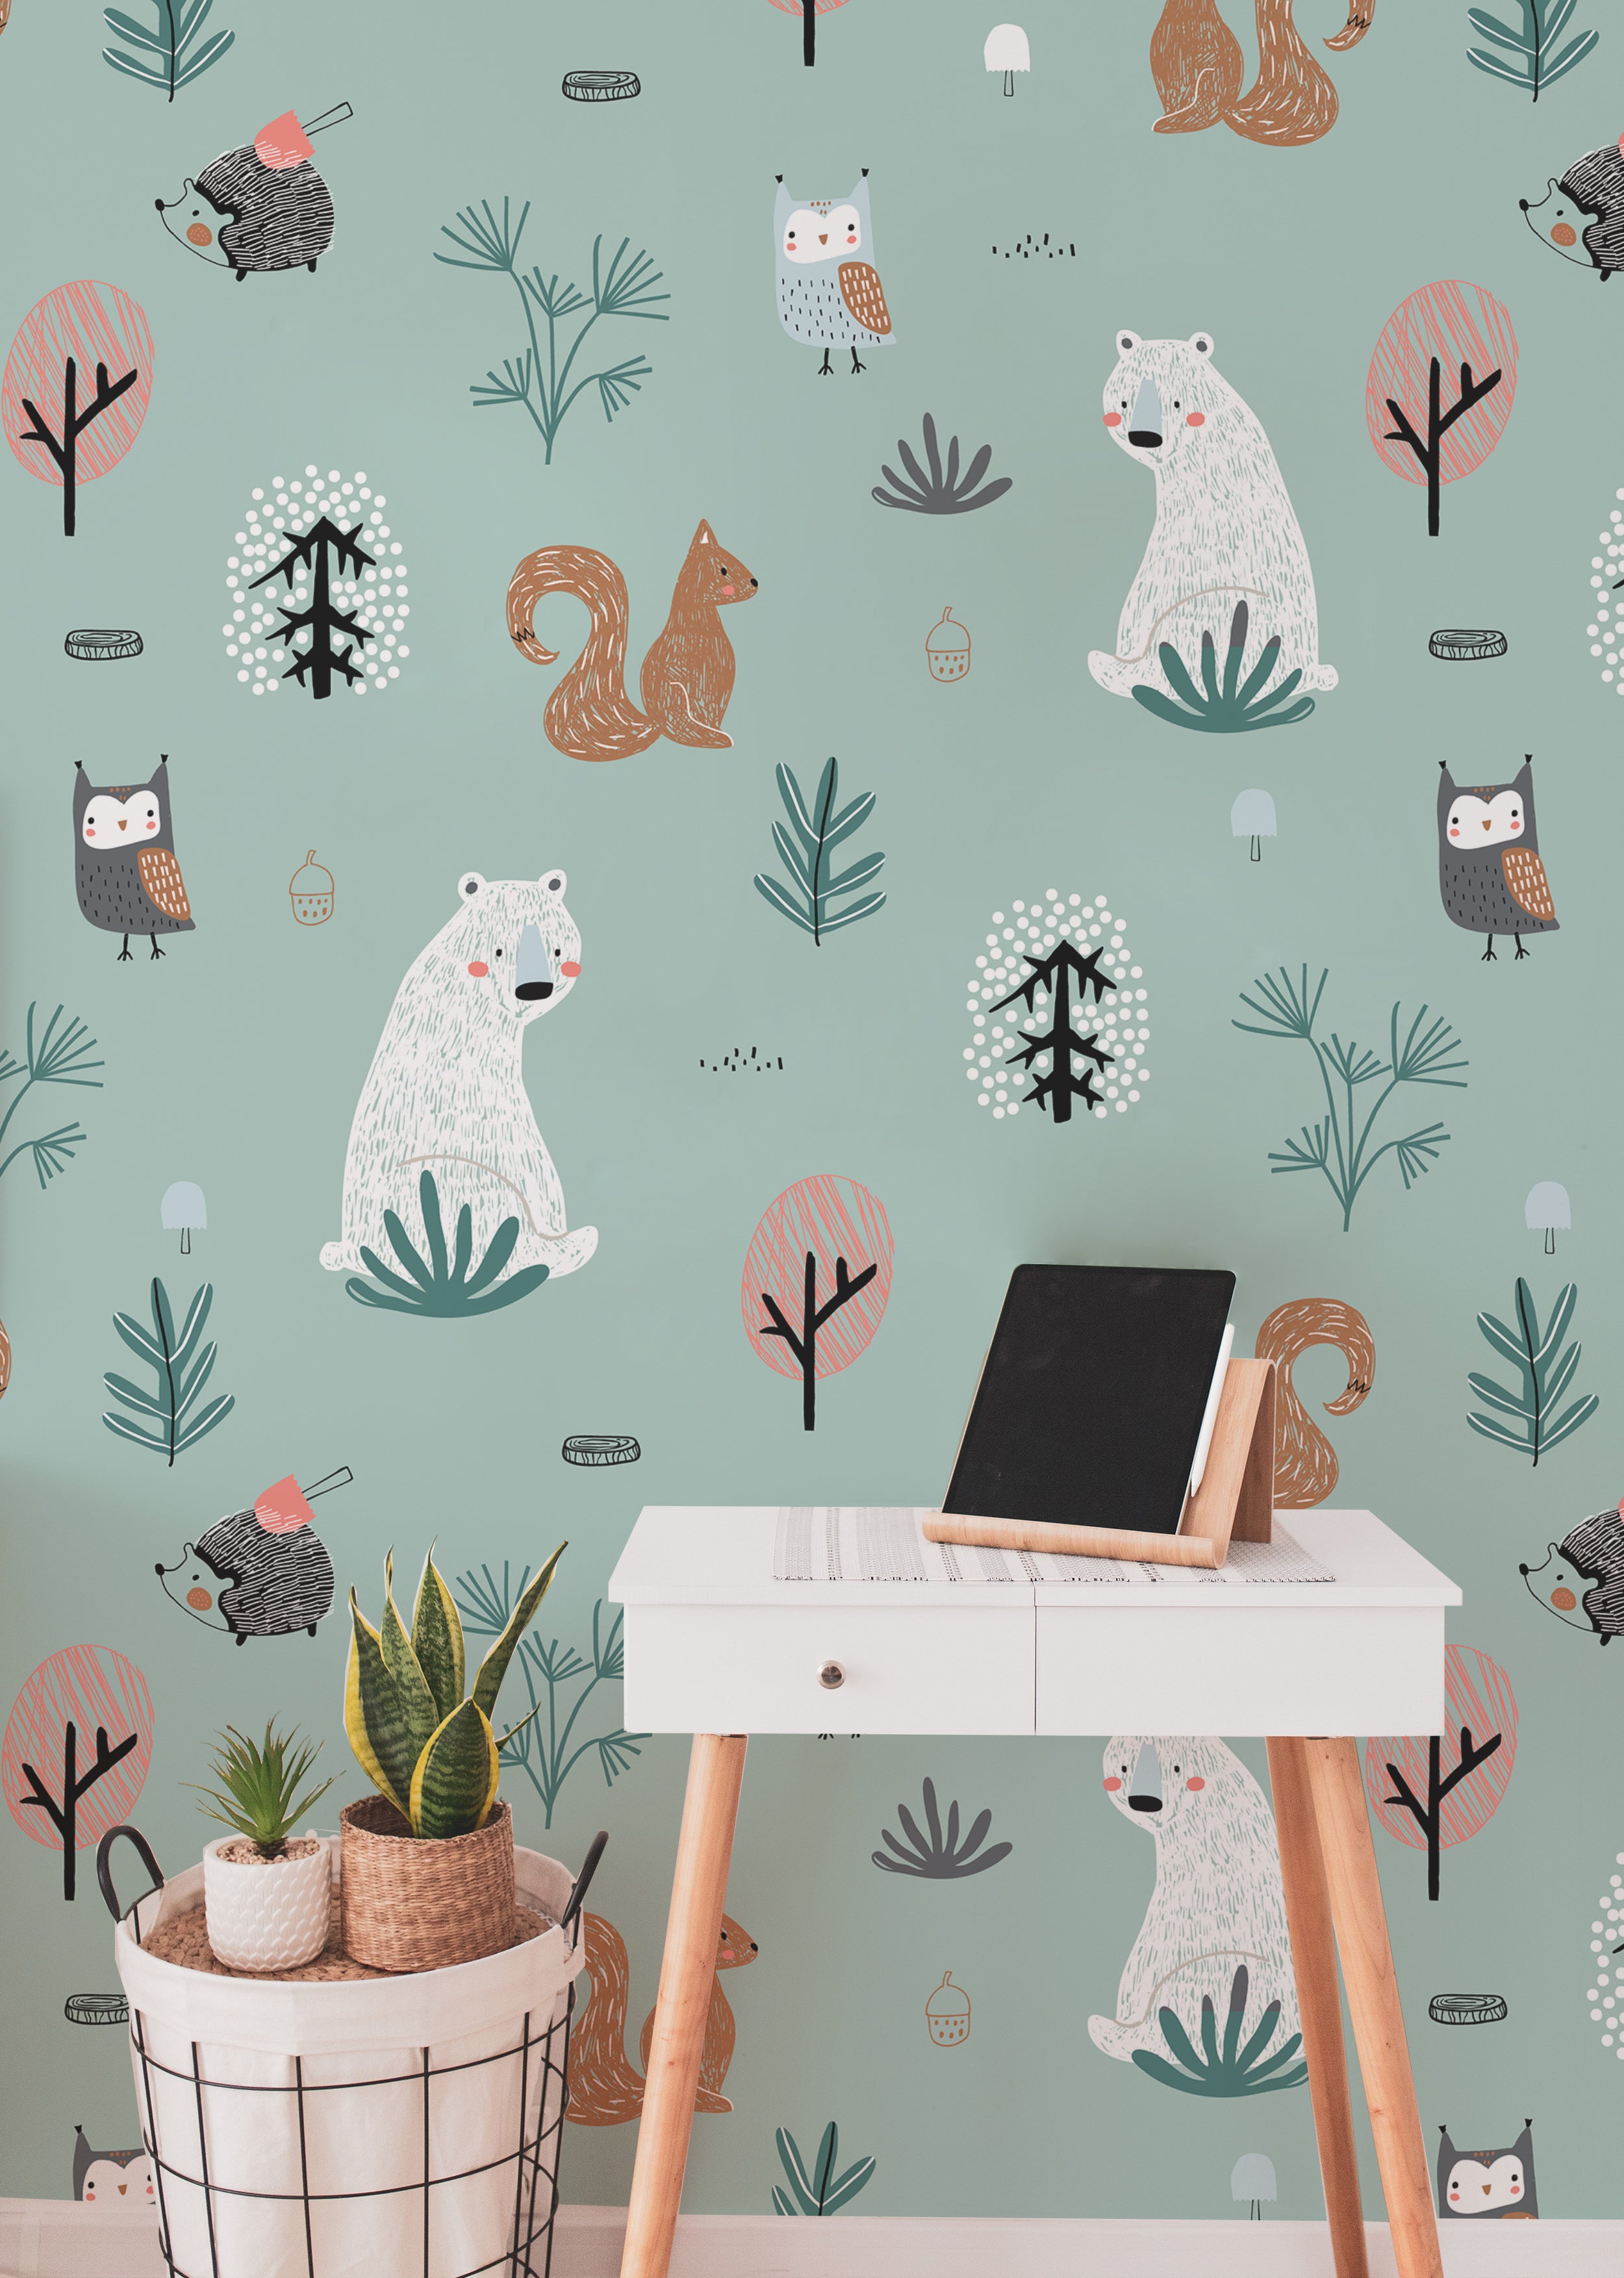 A workspace is transformed with the "Kids Wallpaper - Forest Critters - 50 inches," providing a calming backdrop. The wallpaper features large images of forest animals like bears and owls among trees and plants, enhancing the creative and peaceful atmosphere of the room.